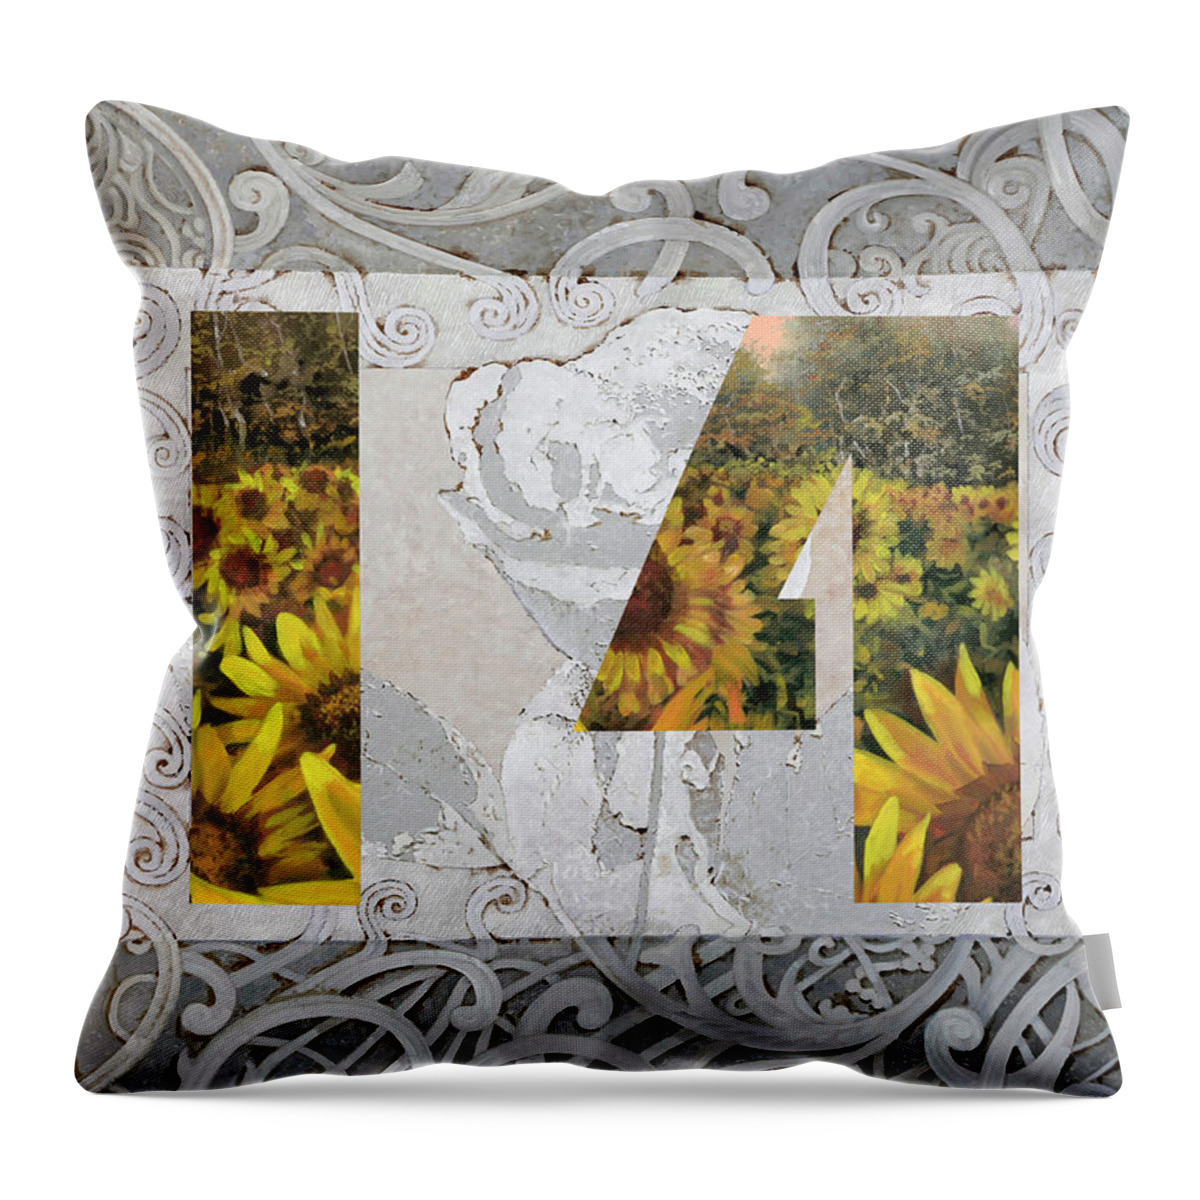 14 Throw Pillow featuring the painting 14 by Guido Borelli